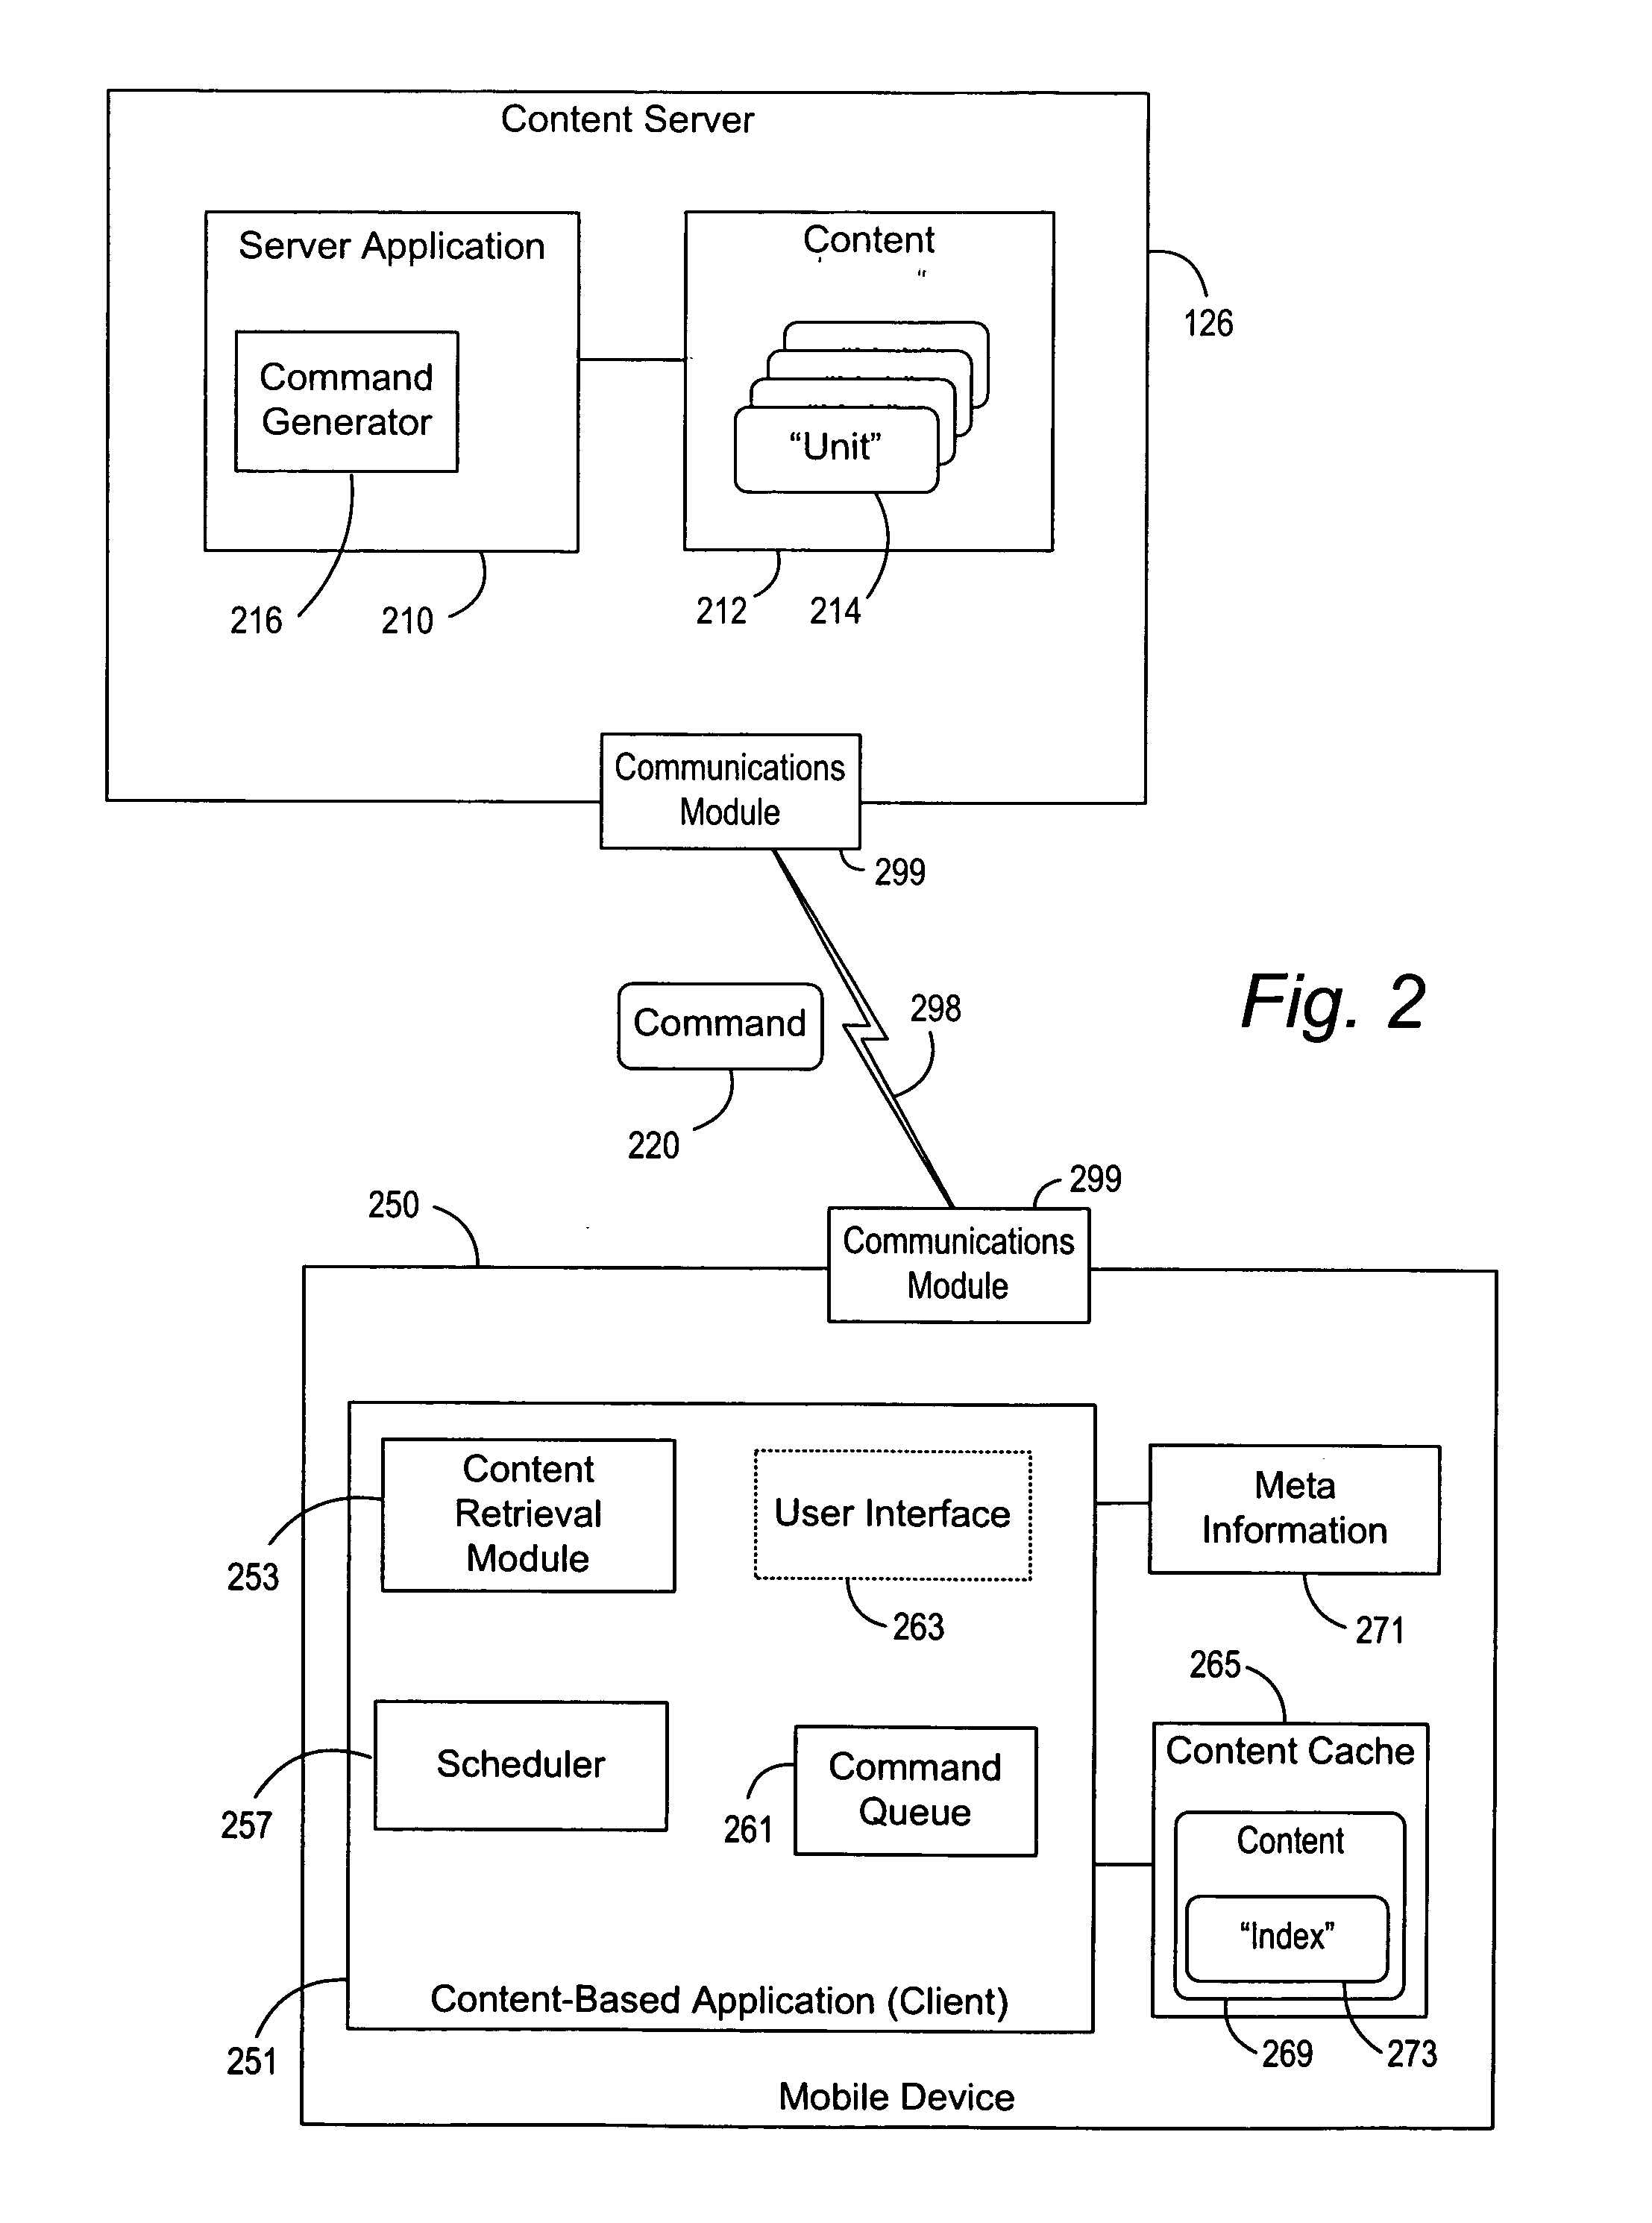 System and method for scheduling content updates in a content-based application